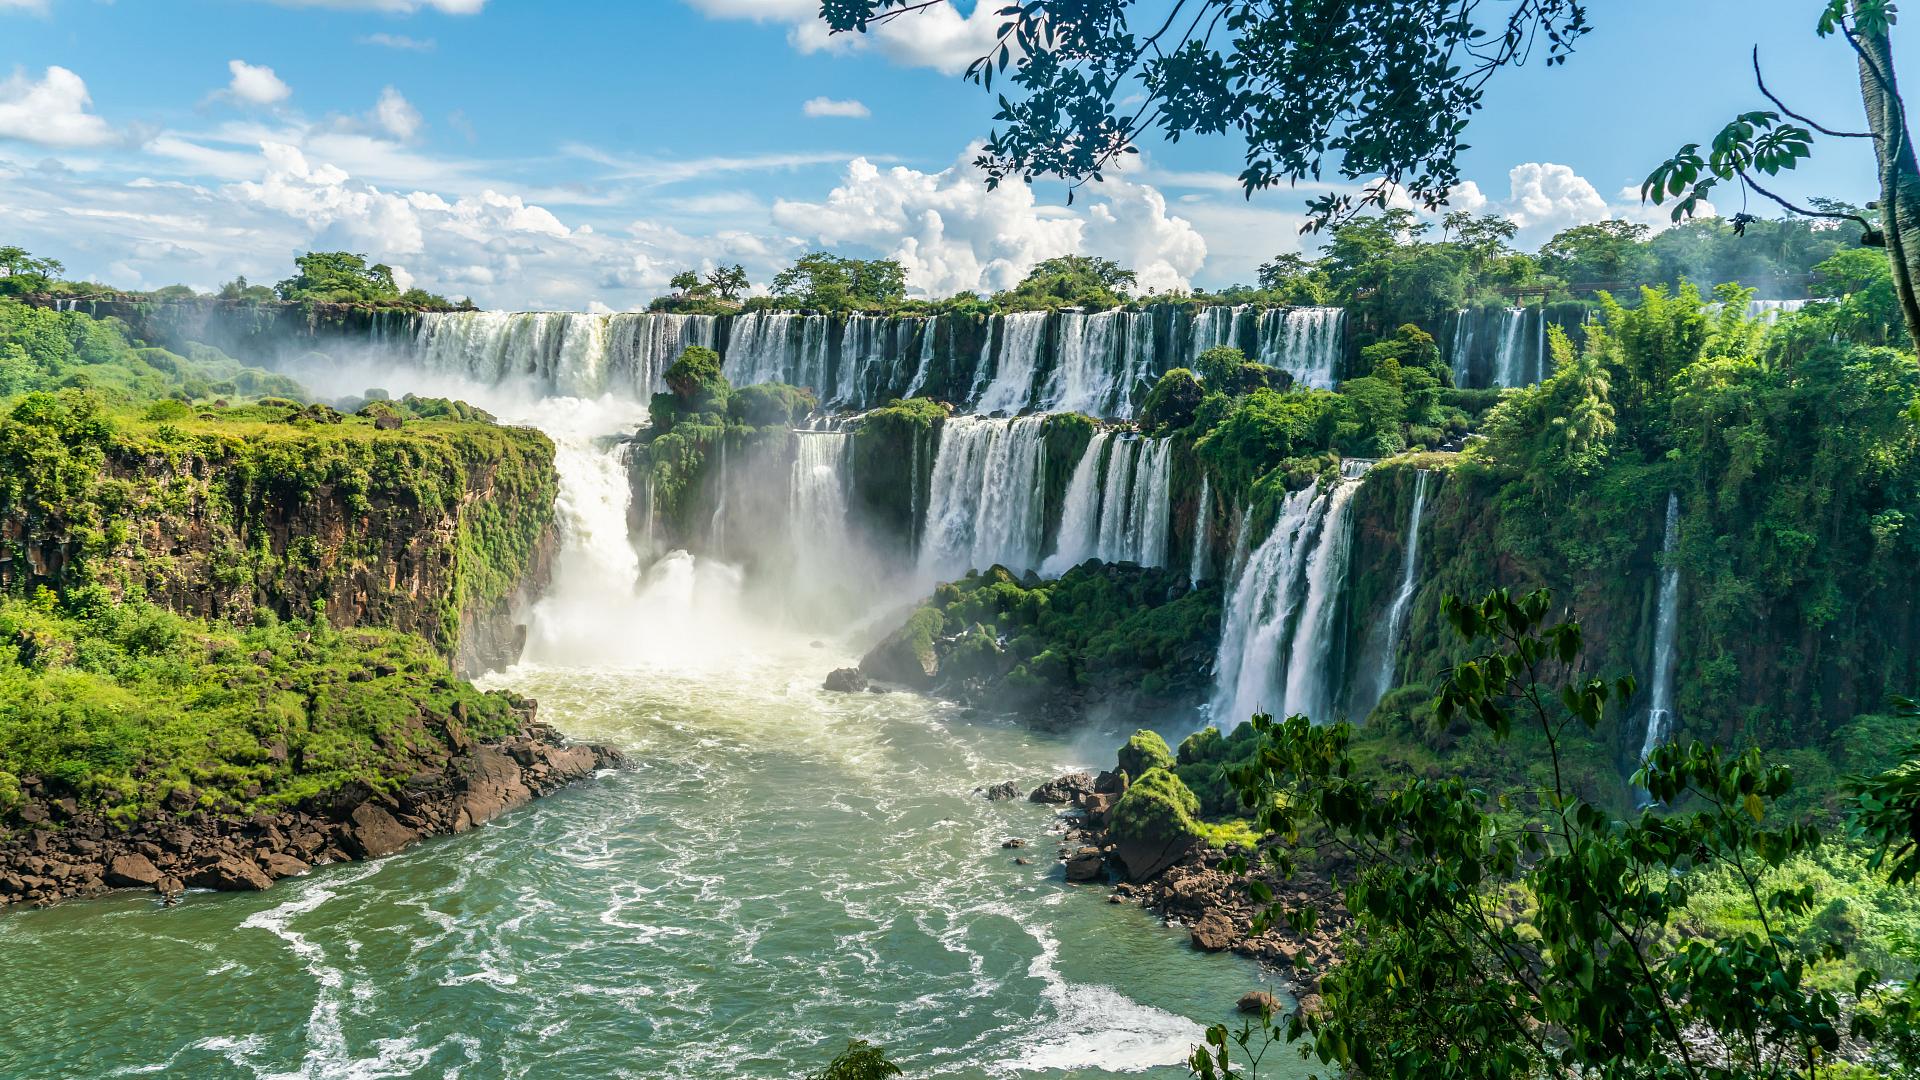 Make the most of your trip to Puerto Iguazú!